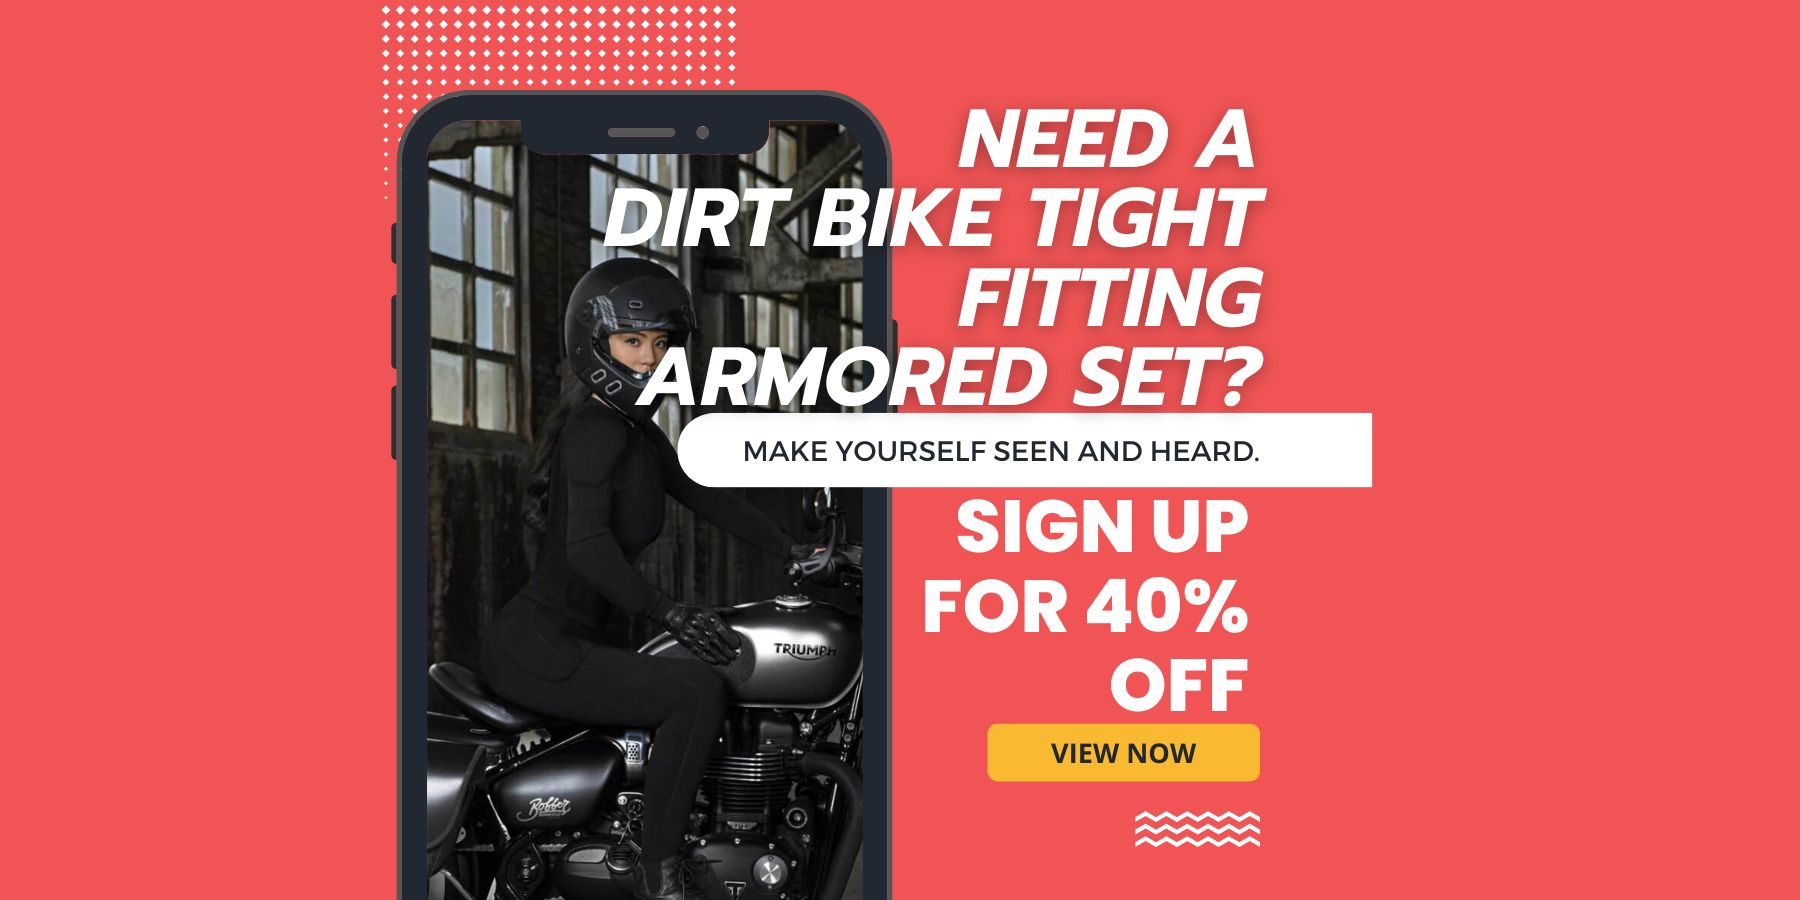 Gearing up for your first dirt bike ride!